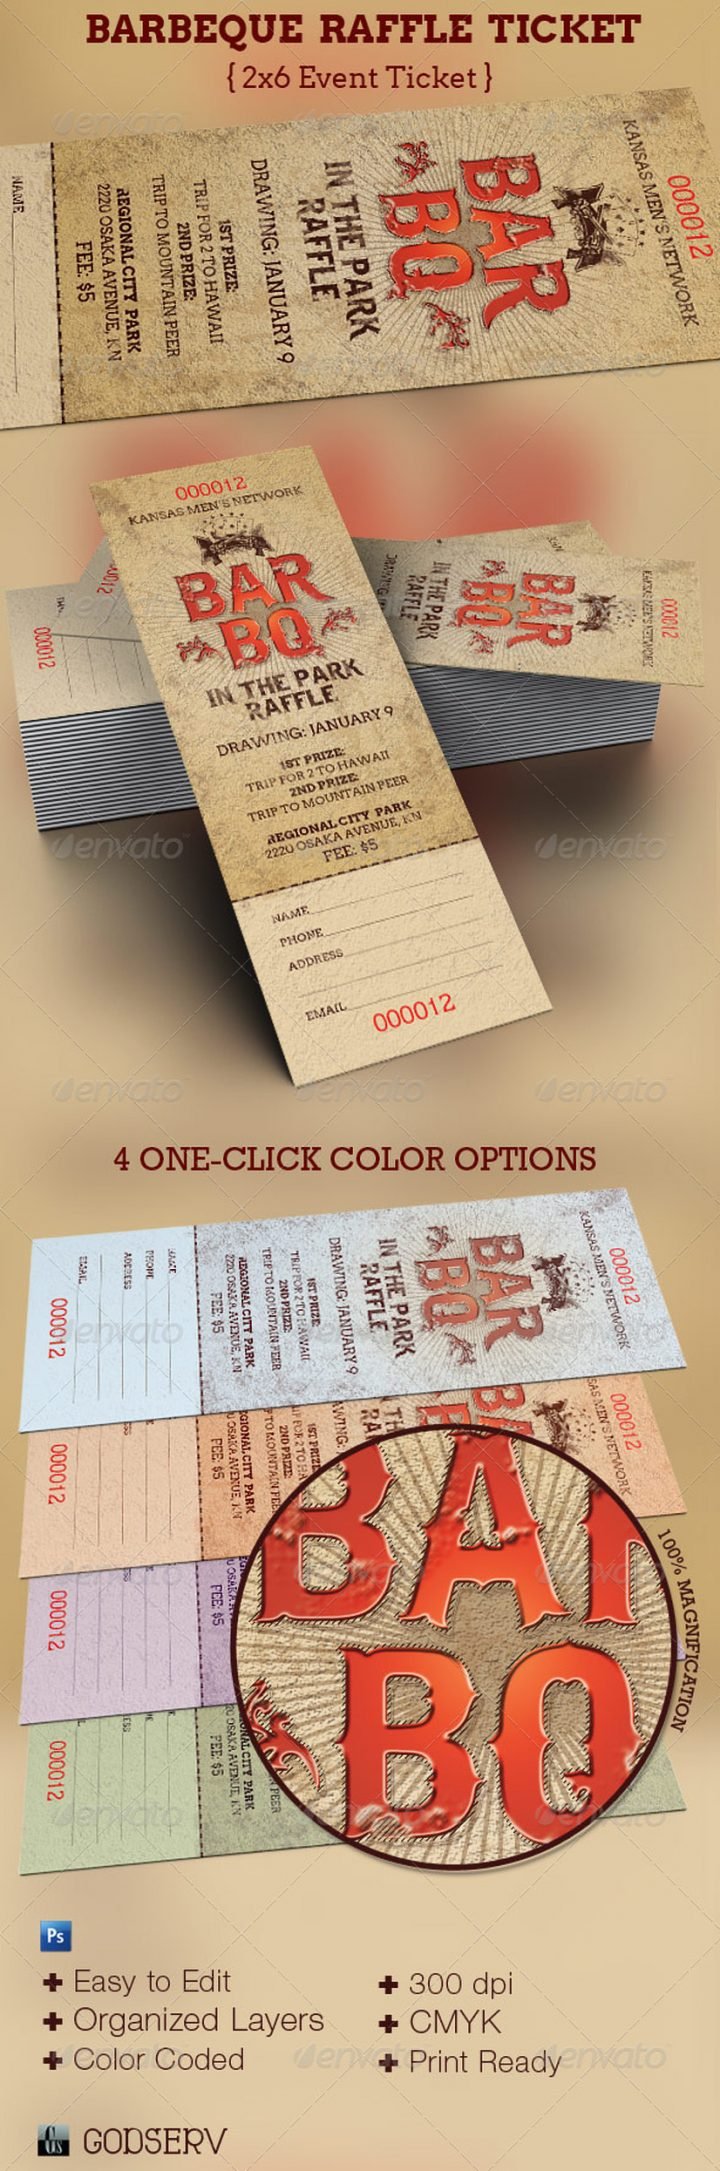 9+ Appetizing Barbecue Ticket Templates PSD, Vector EPS Free